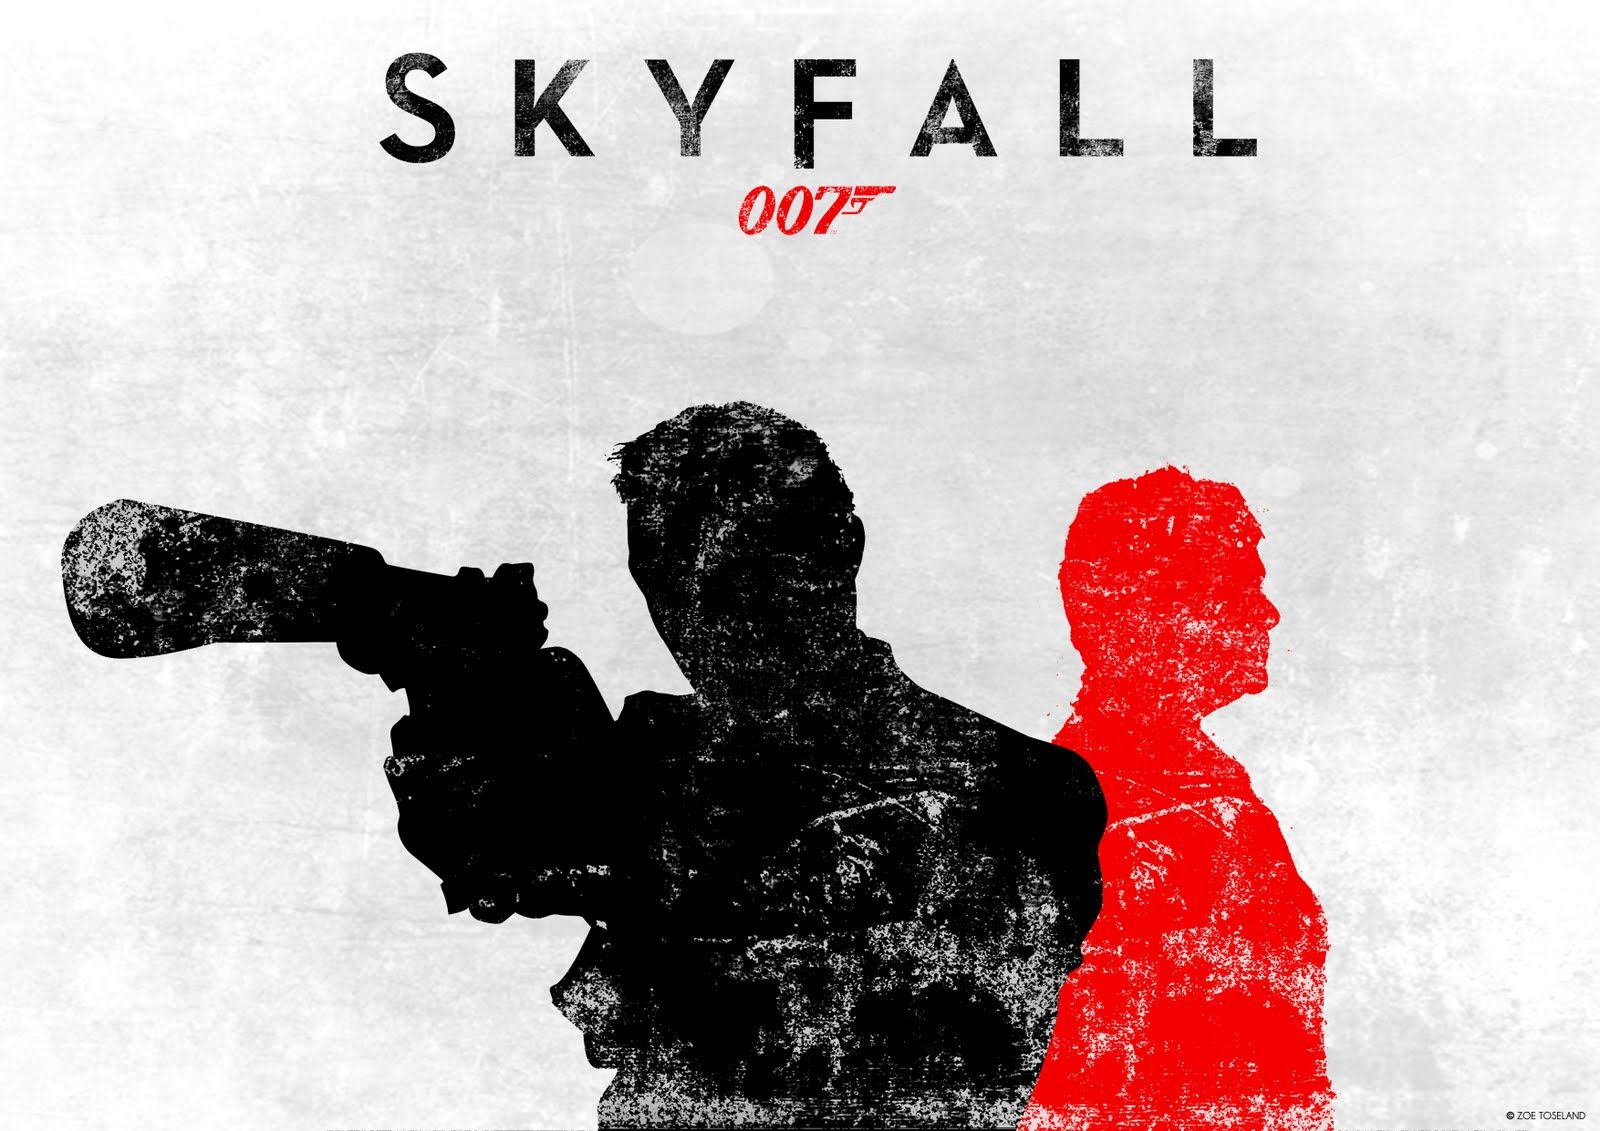 HD Wallpapers for iPhone 5 - James Bond 007 Skyfall Wallpapers ...